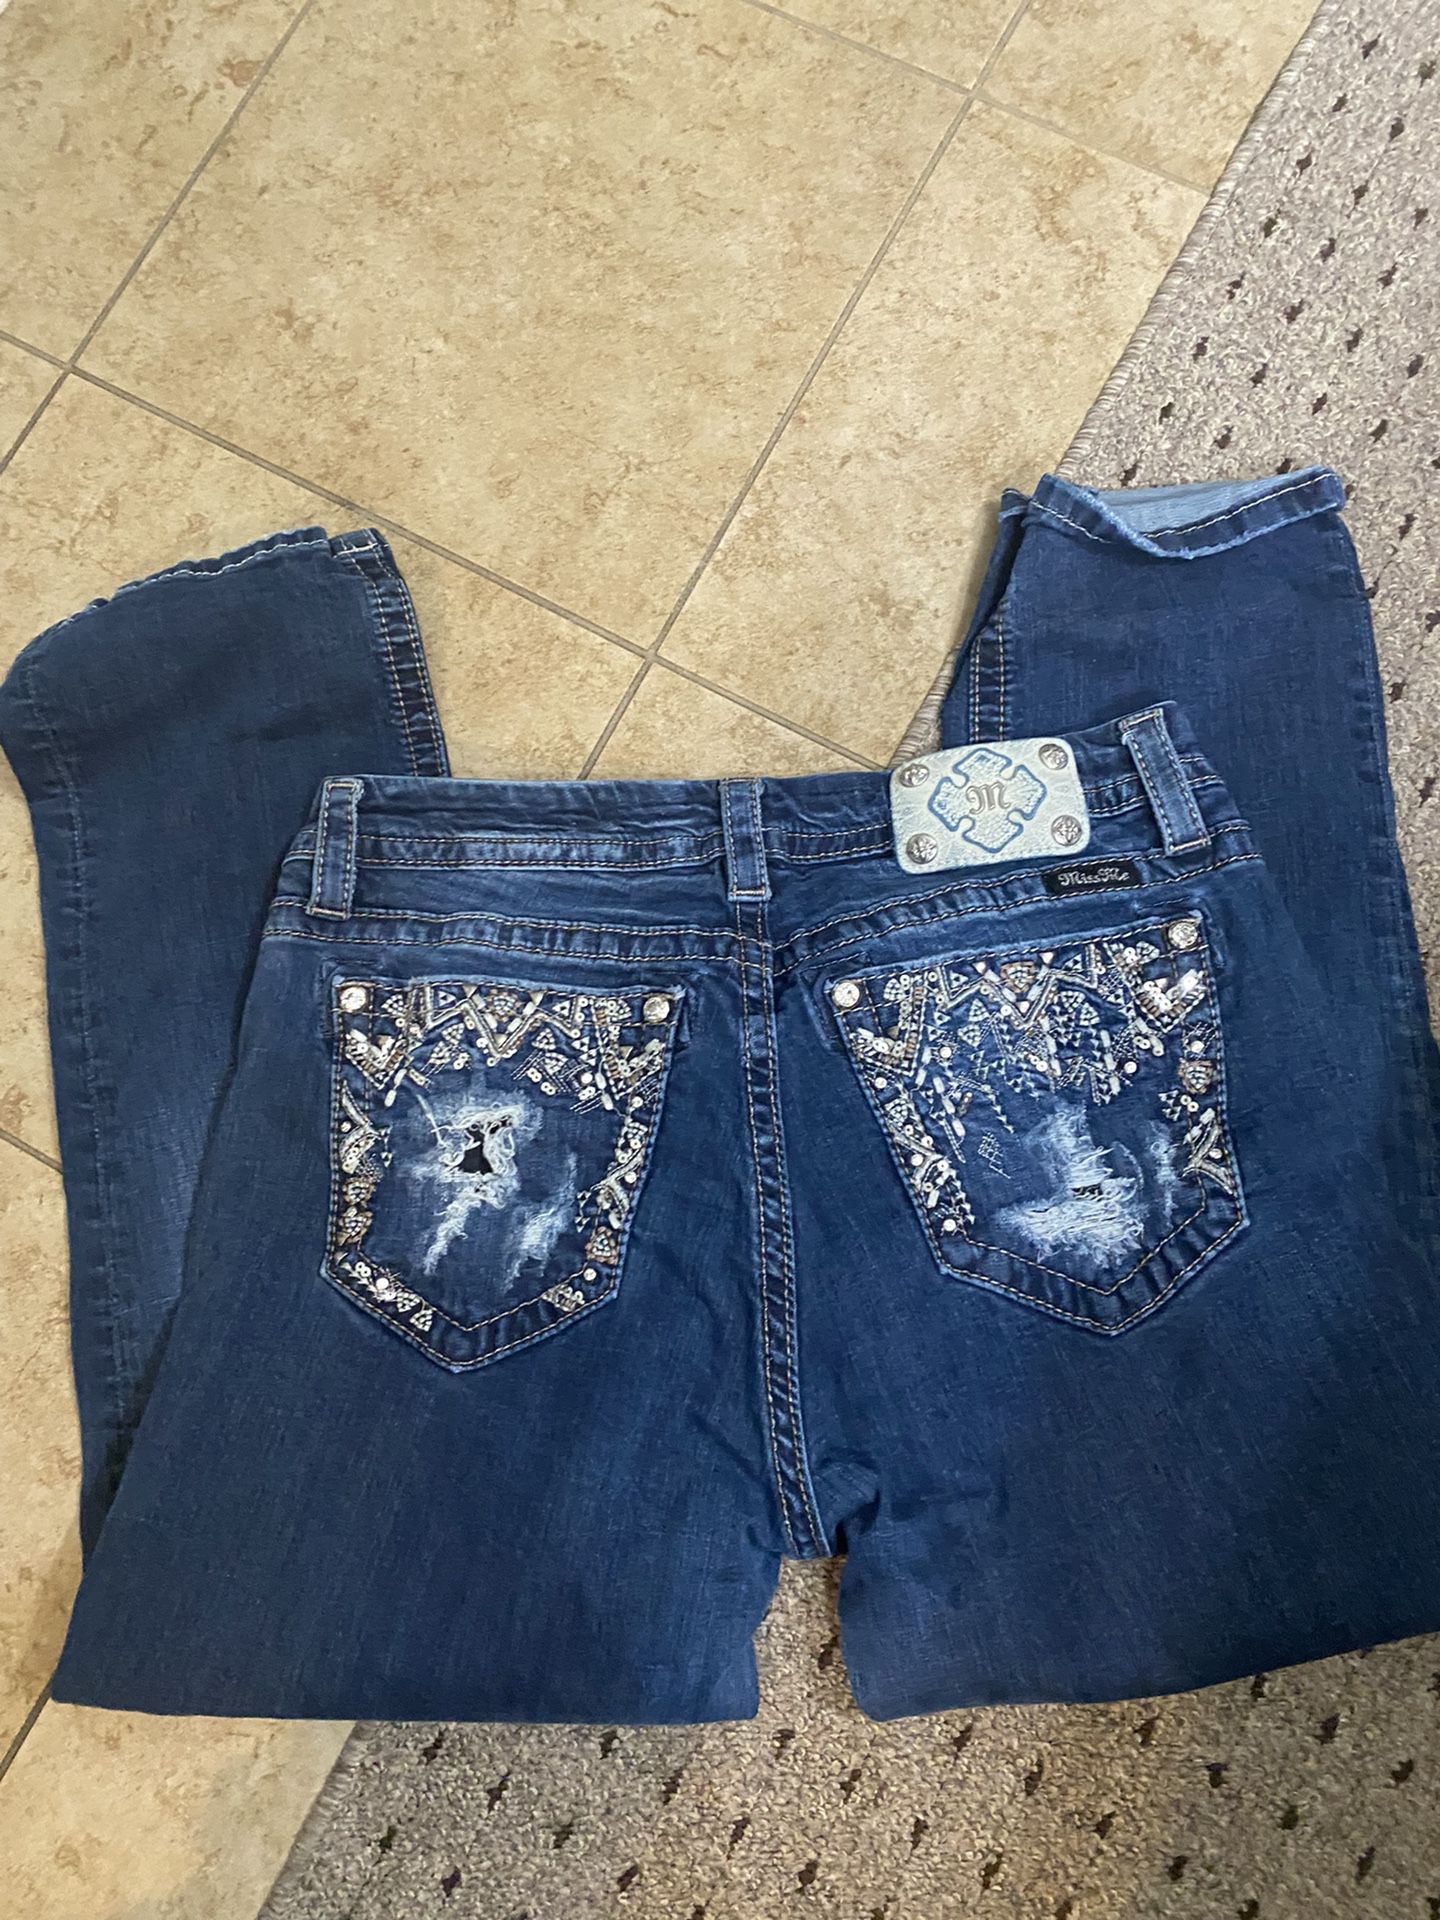 Produkt justering maskulinitet Miss Me Jeans Size 32 (Madera) for Sale in Madera, CA - OfferUp